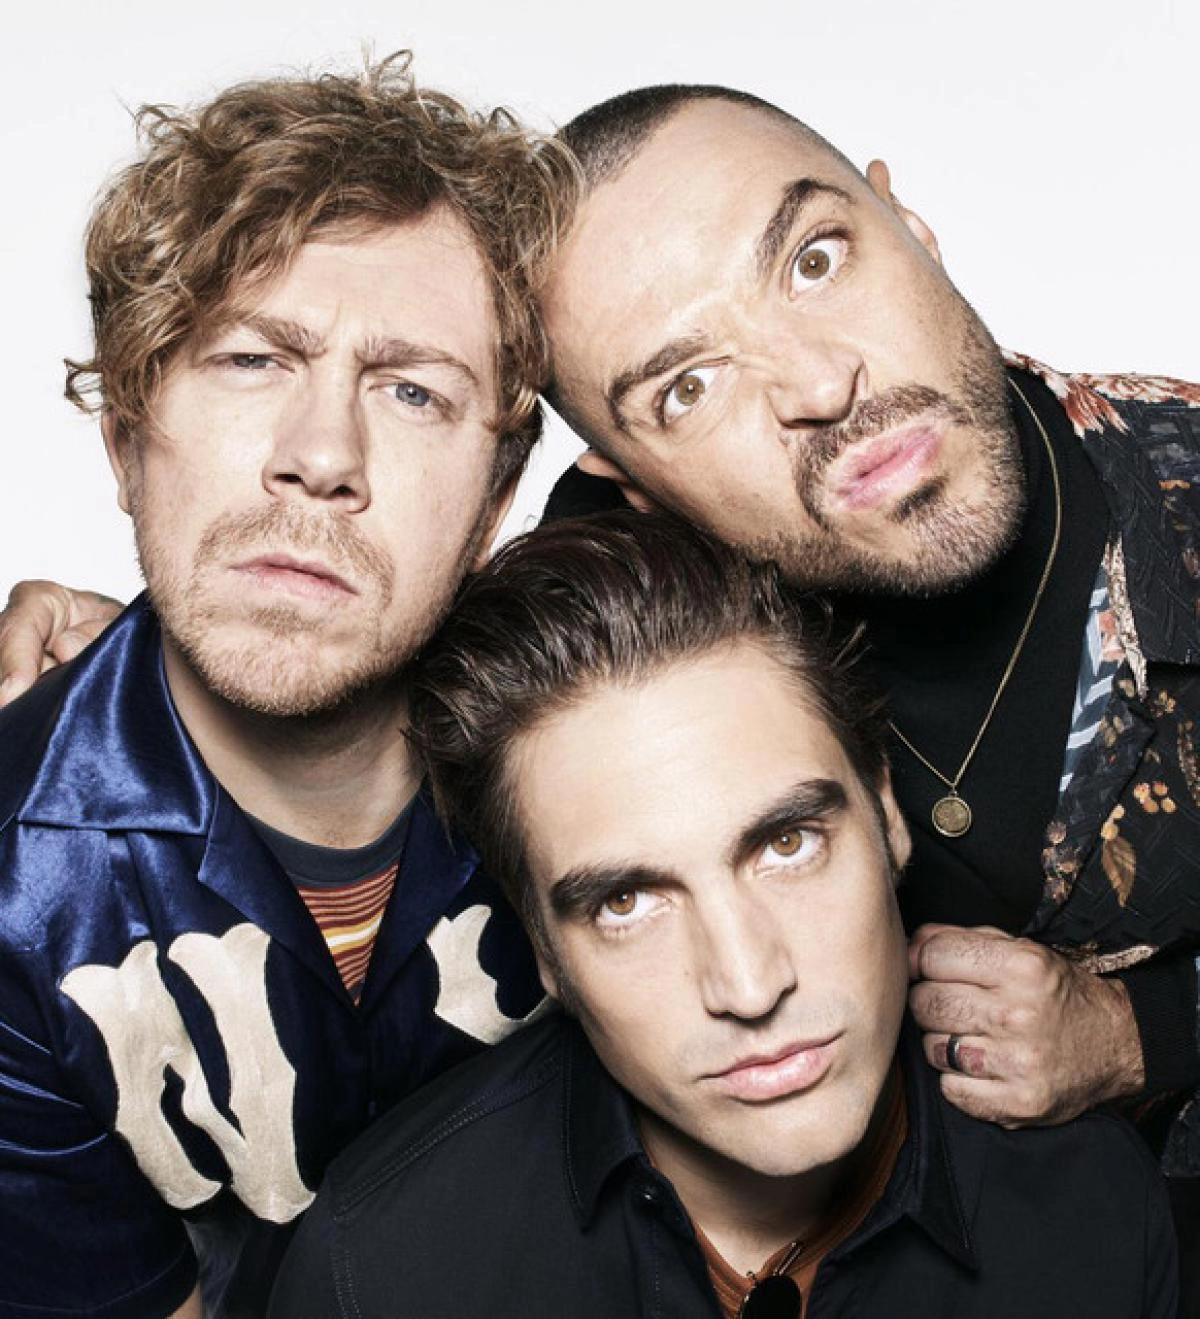 Busted at Scarborough Open Air Theatre Tickets